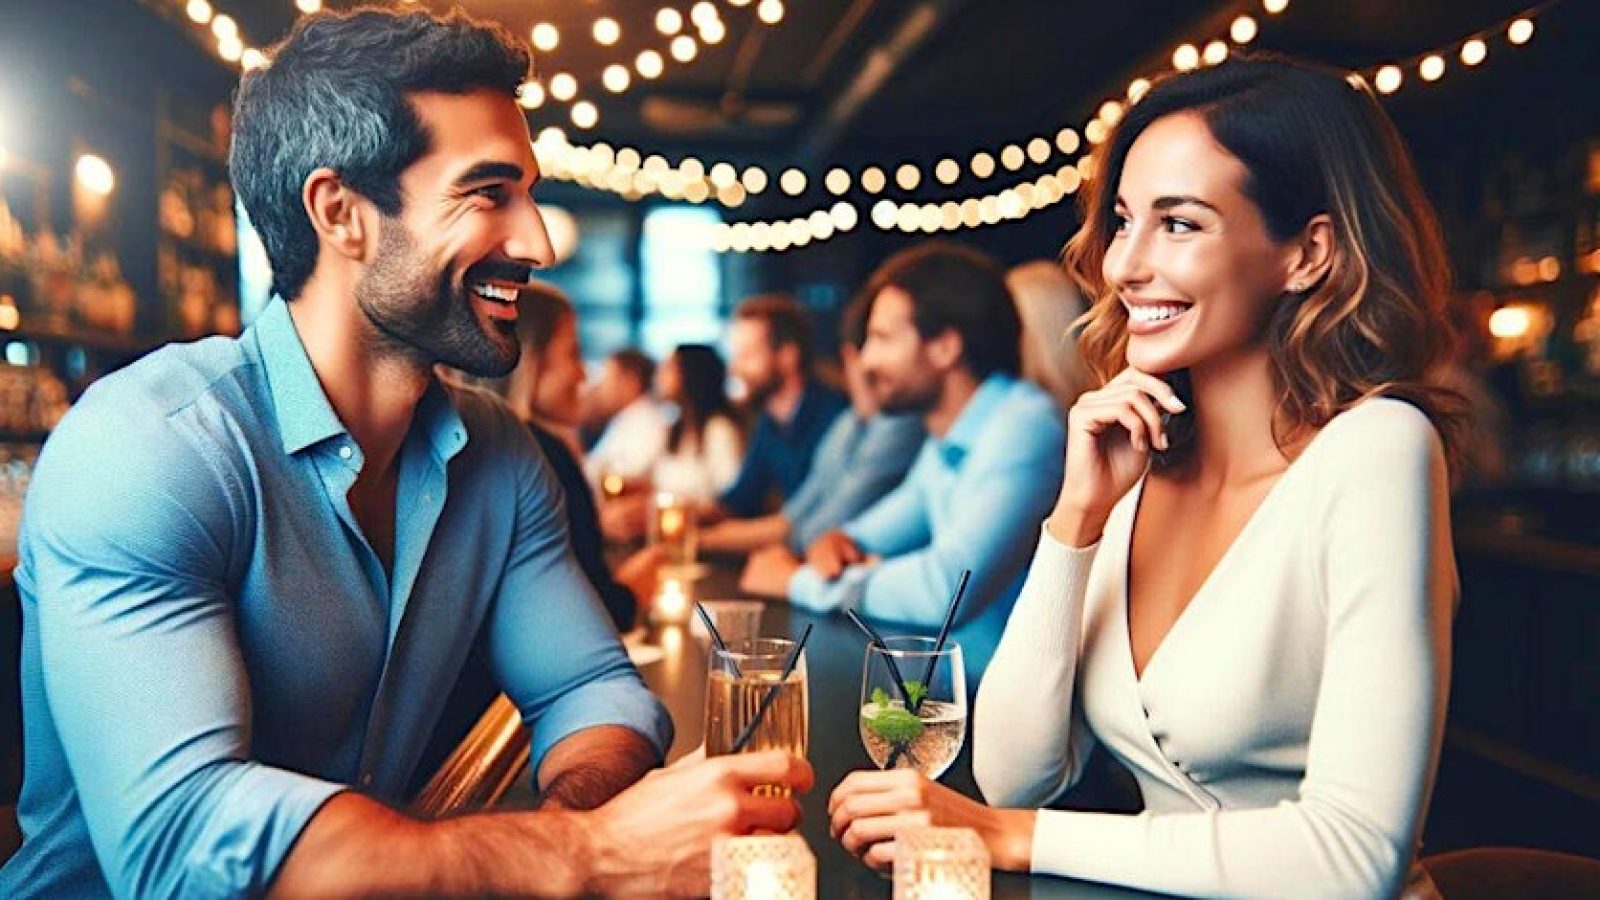 mature singles meeting at over 50s speed dating event in a bar